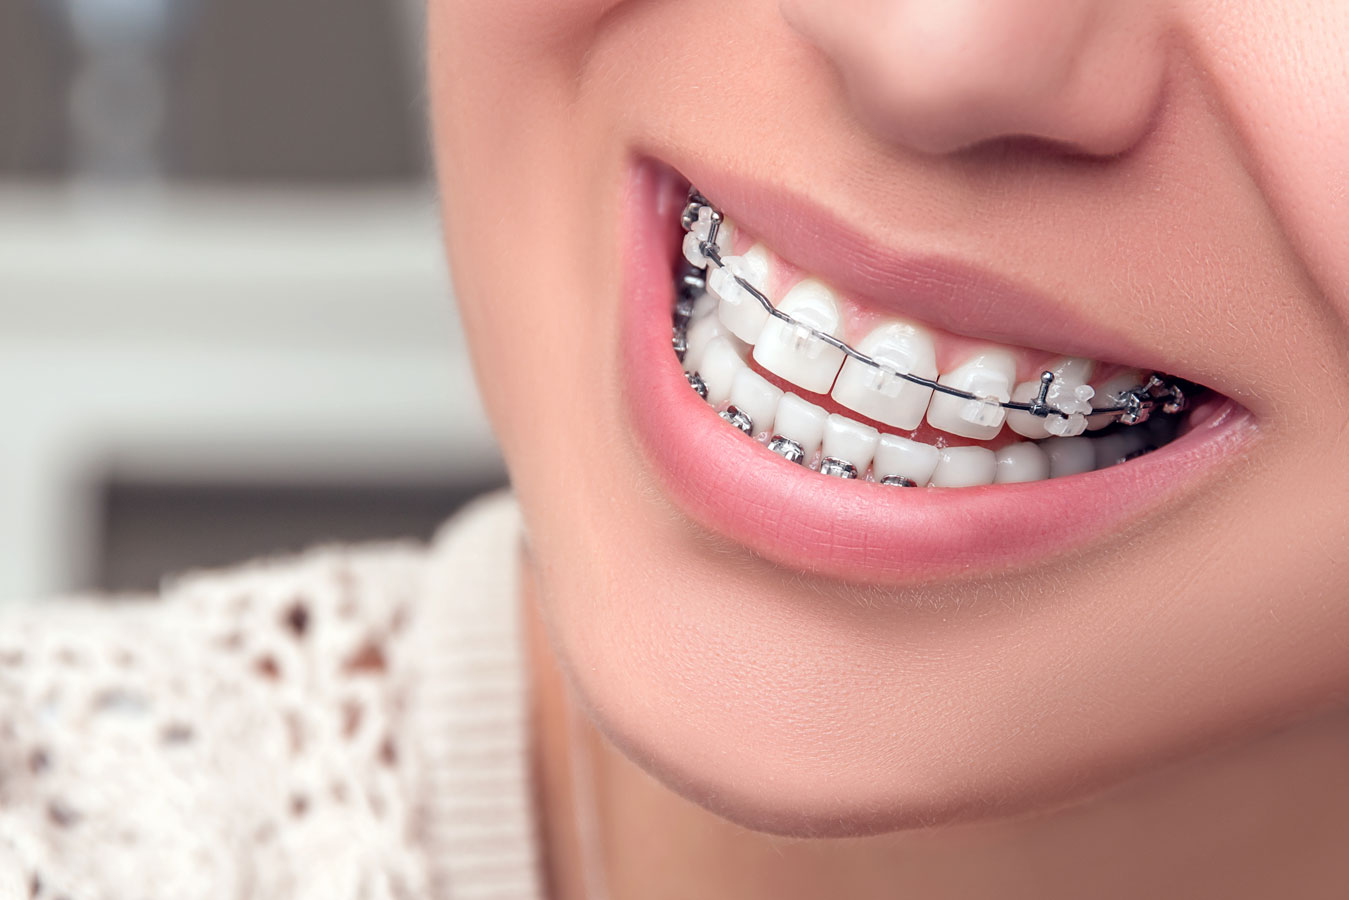 Clear Ceramic Braces Wahroonga  Wahroonga Family Dental Centre